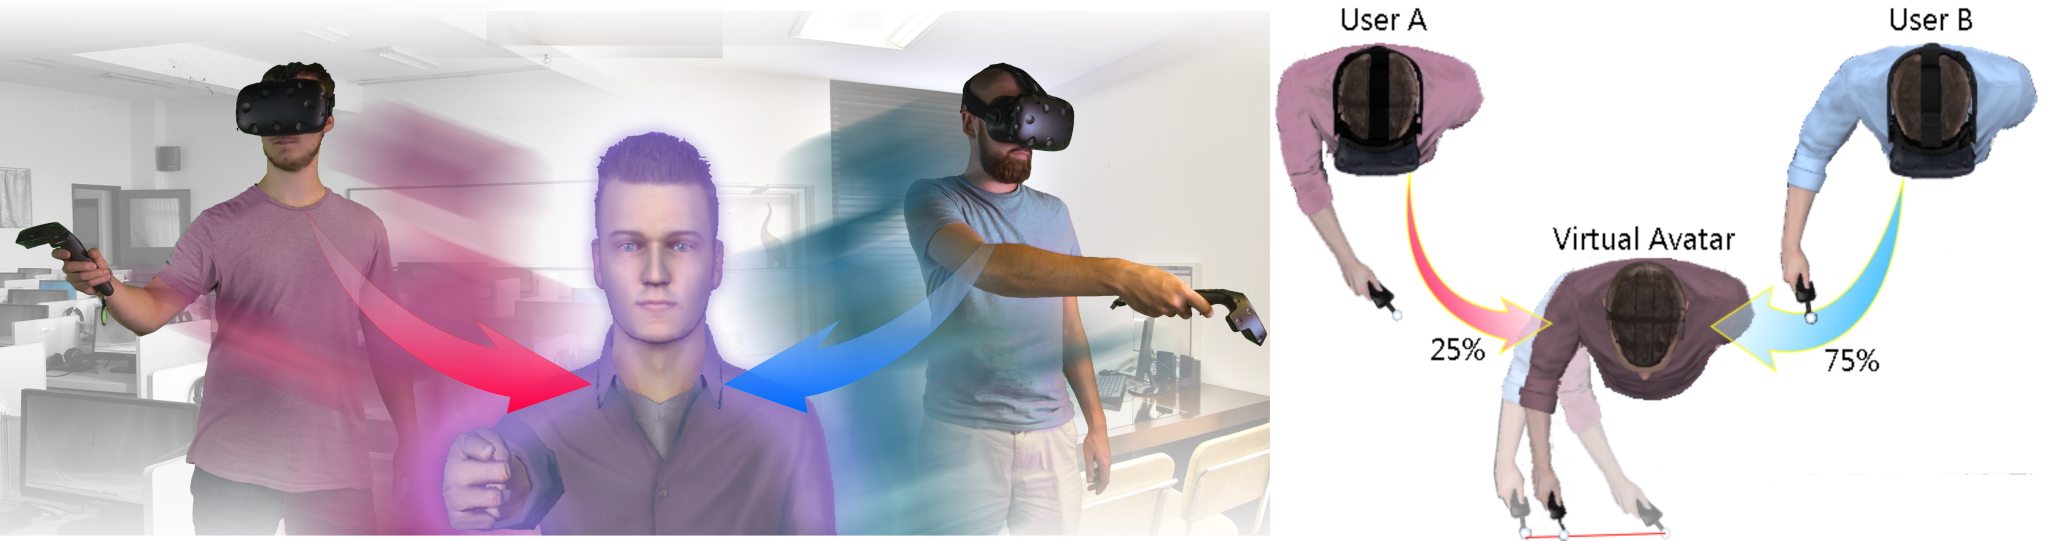 Our “Virtual Co-Embodimen” experience enables a pair of users to be embodied simultaneously in the same virtual avatar (Left). The positions and orientations of the two users are applied to the virtual body of the avatar based on a weighted average, e.g., “User A” with 25% control
and “User B” with 75% control over the virtual body (Right).